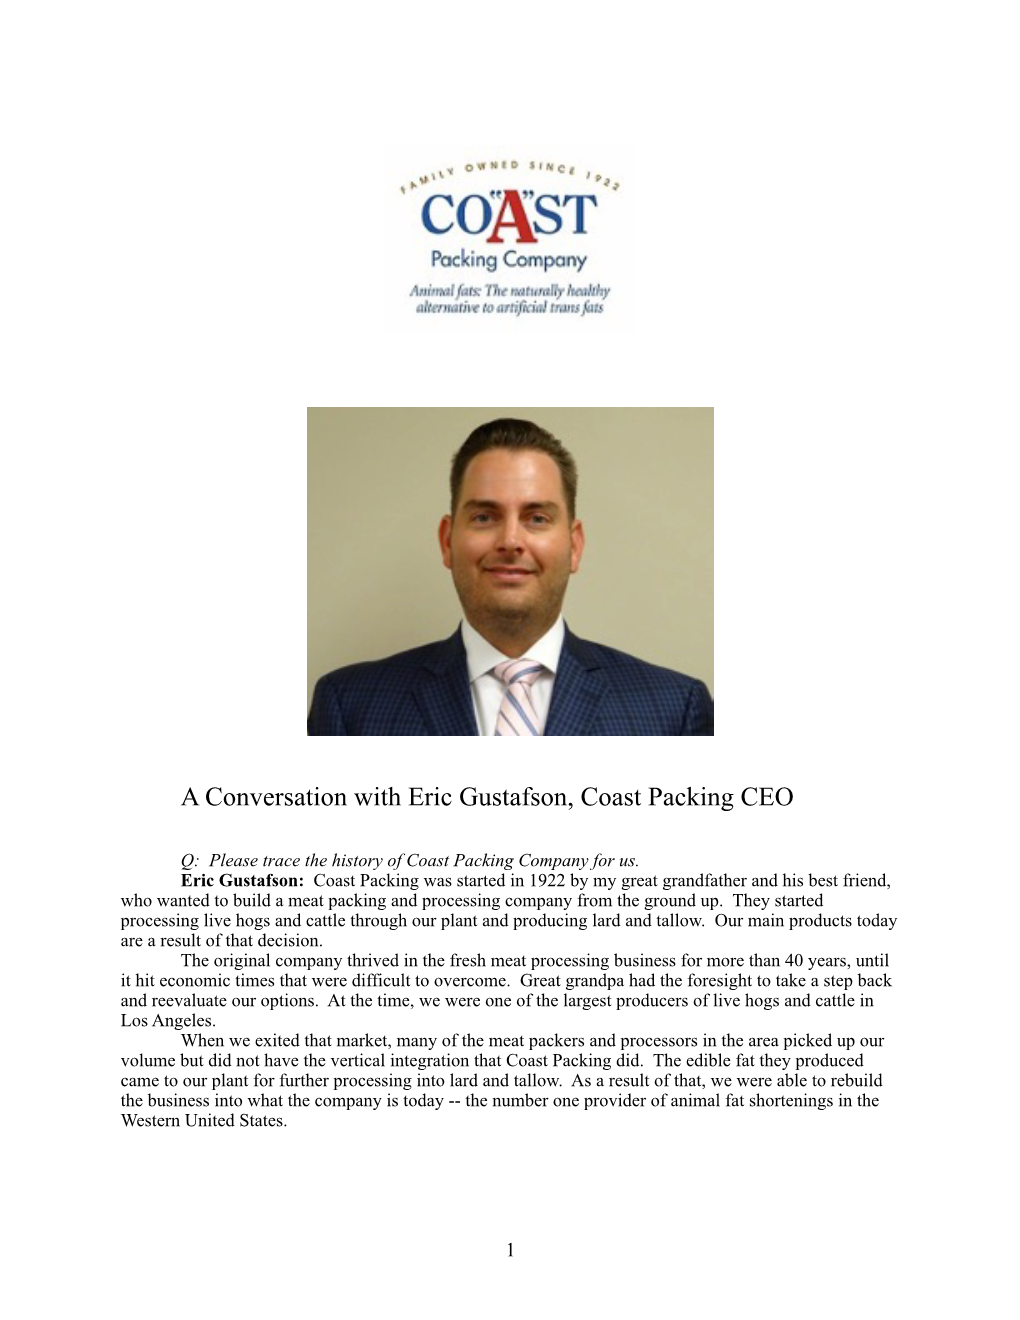 A Conversation with Eric Gustafson, Coast Packing CEO